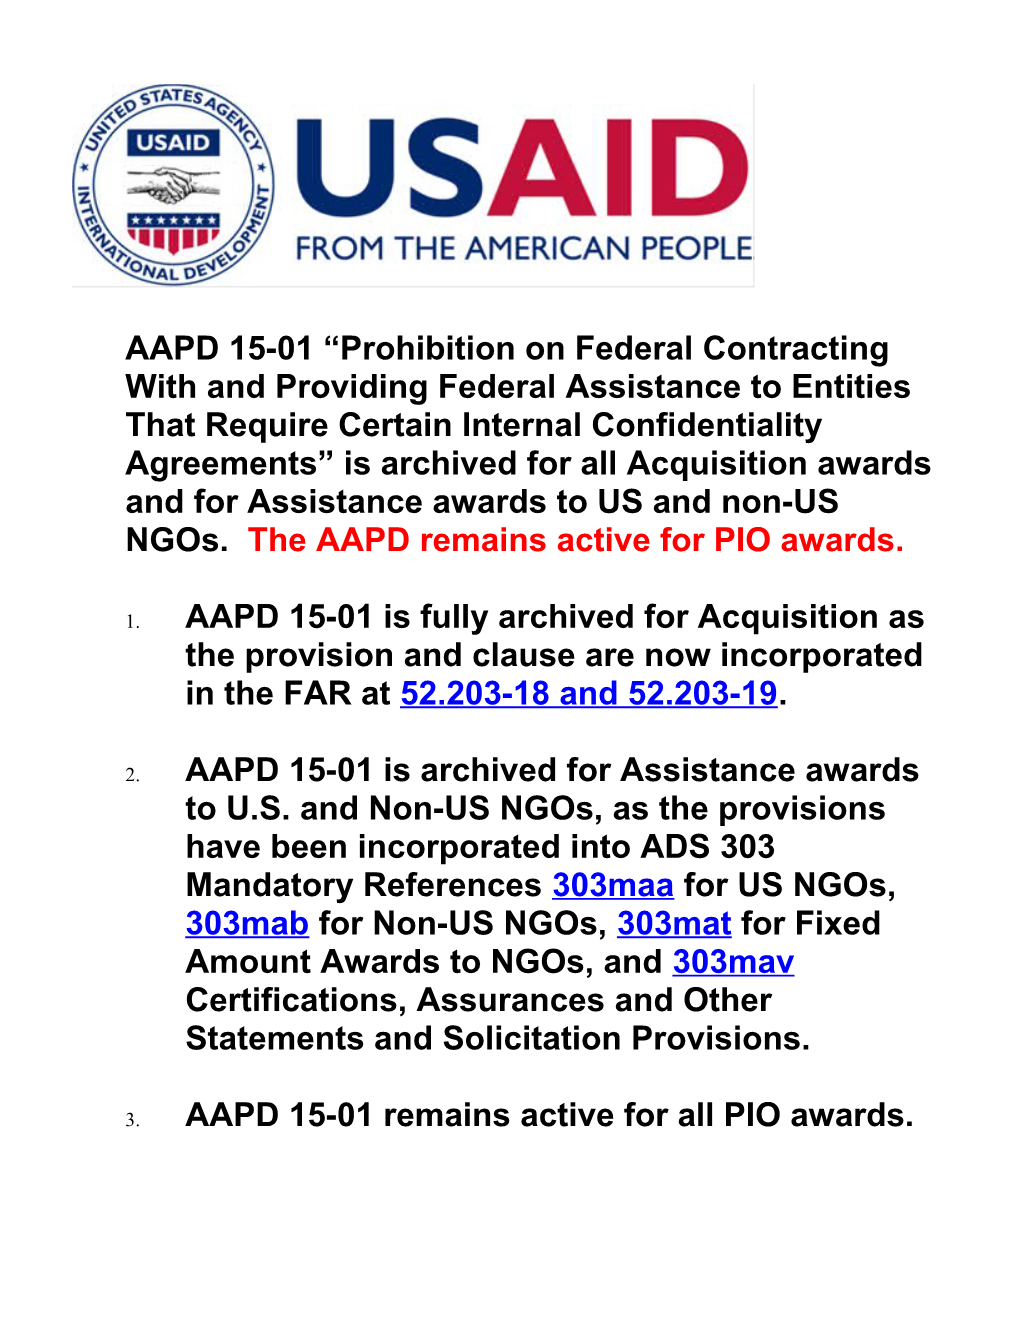 AAPD 15-01 Prohibition on Federal Contracting with and Providing Federal Assistance To